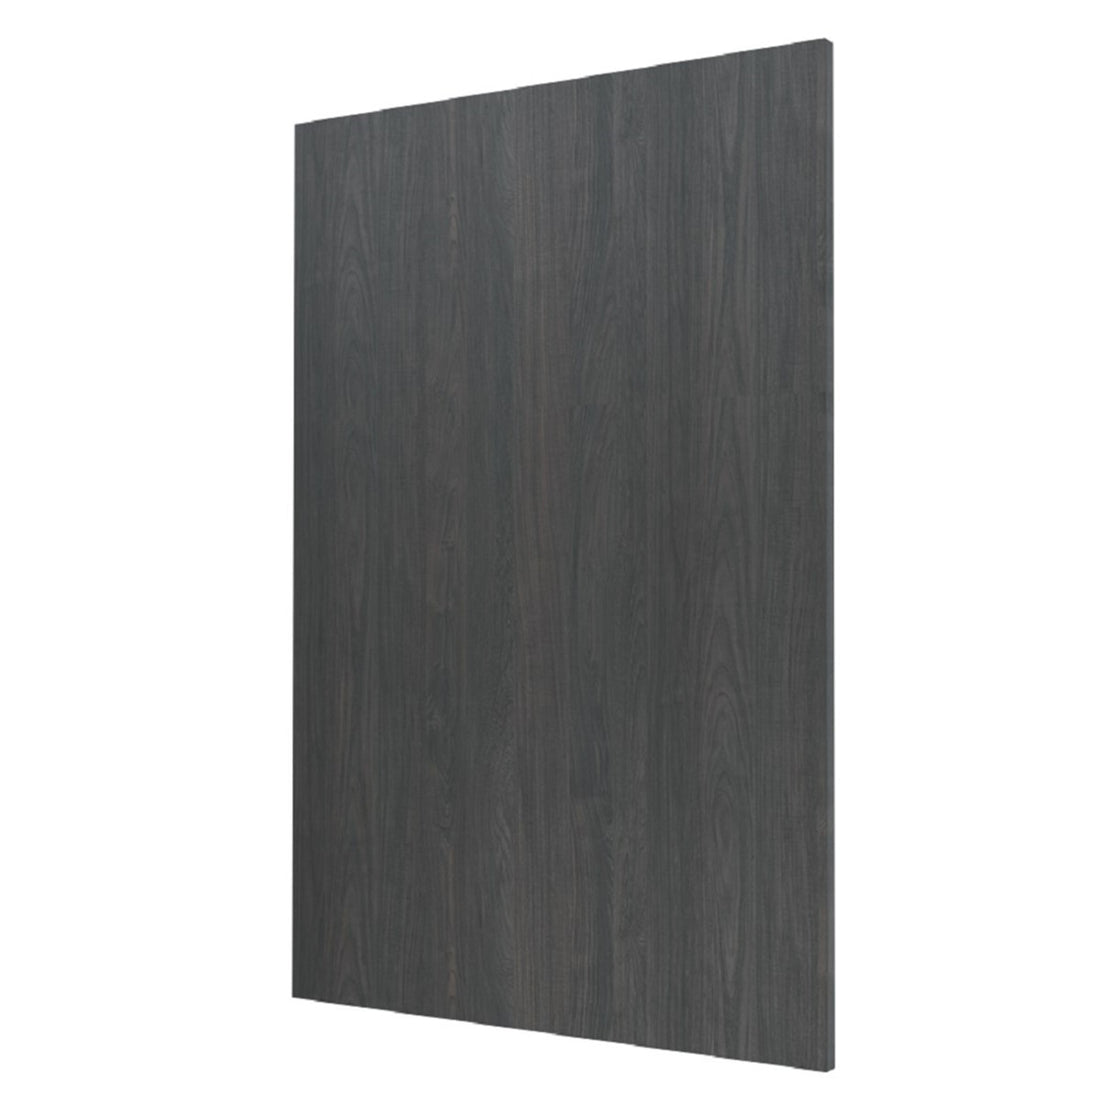 Carbon Marine Slab Style Wall Kitchen Cabinet End Panel (12 in W x 0.75 in D x 36 in H) -  Pro-Edge HD